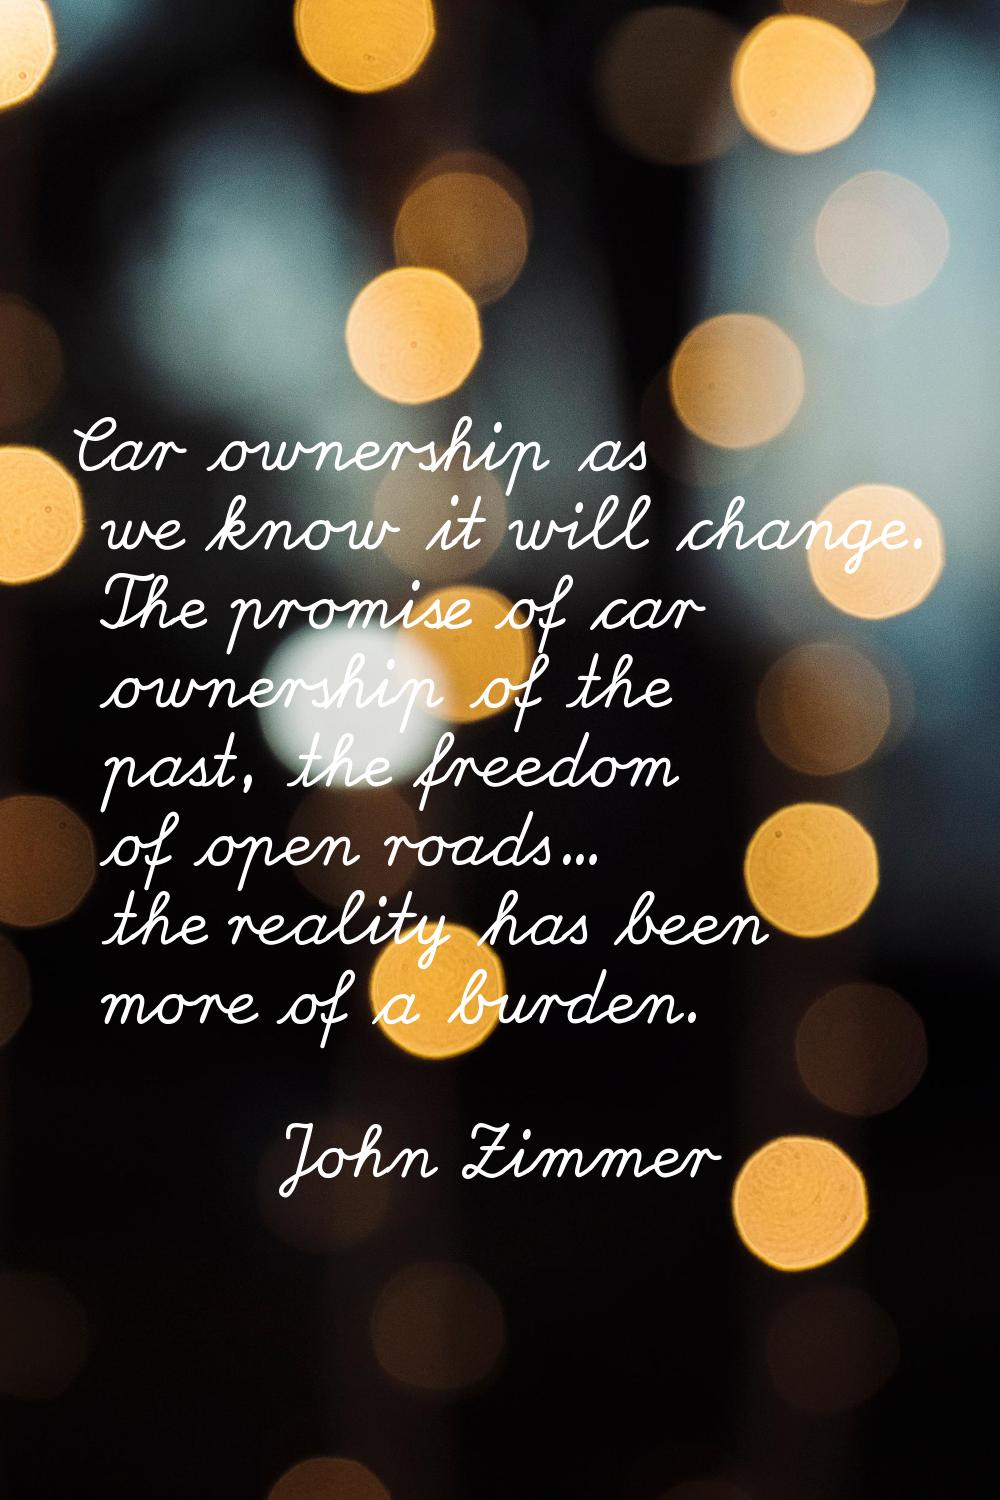 Car ownership as we know it will change. The promise of car ownership of the past, the freedom of o